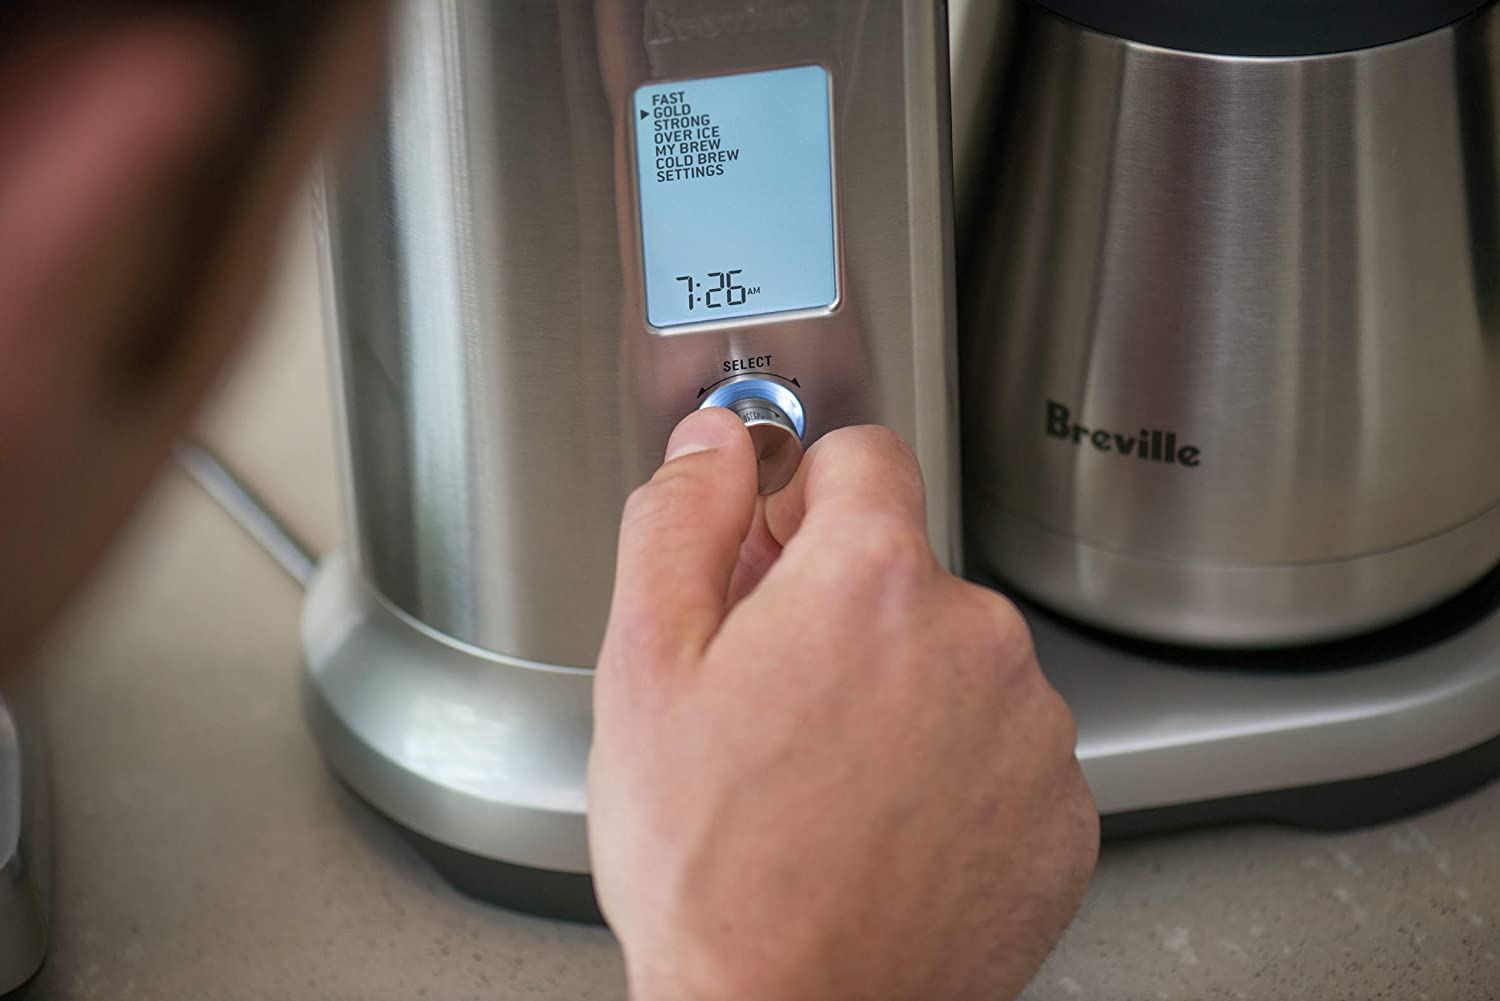 https://www.digitaltrends.com/wp-content/uploads/2022/09/Breville-Precision-Brewer-Thermal-Coffee-Maker-Controls.jpg?fit=720%2C480&p=1